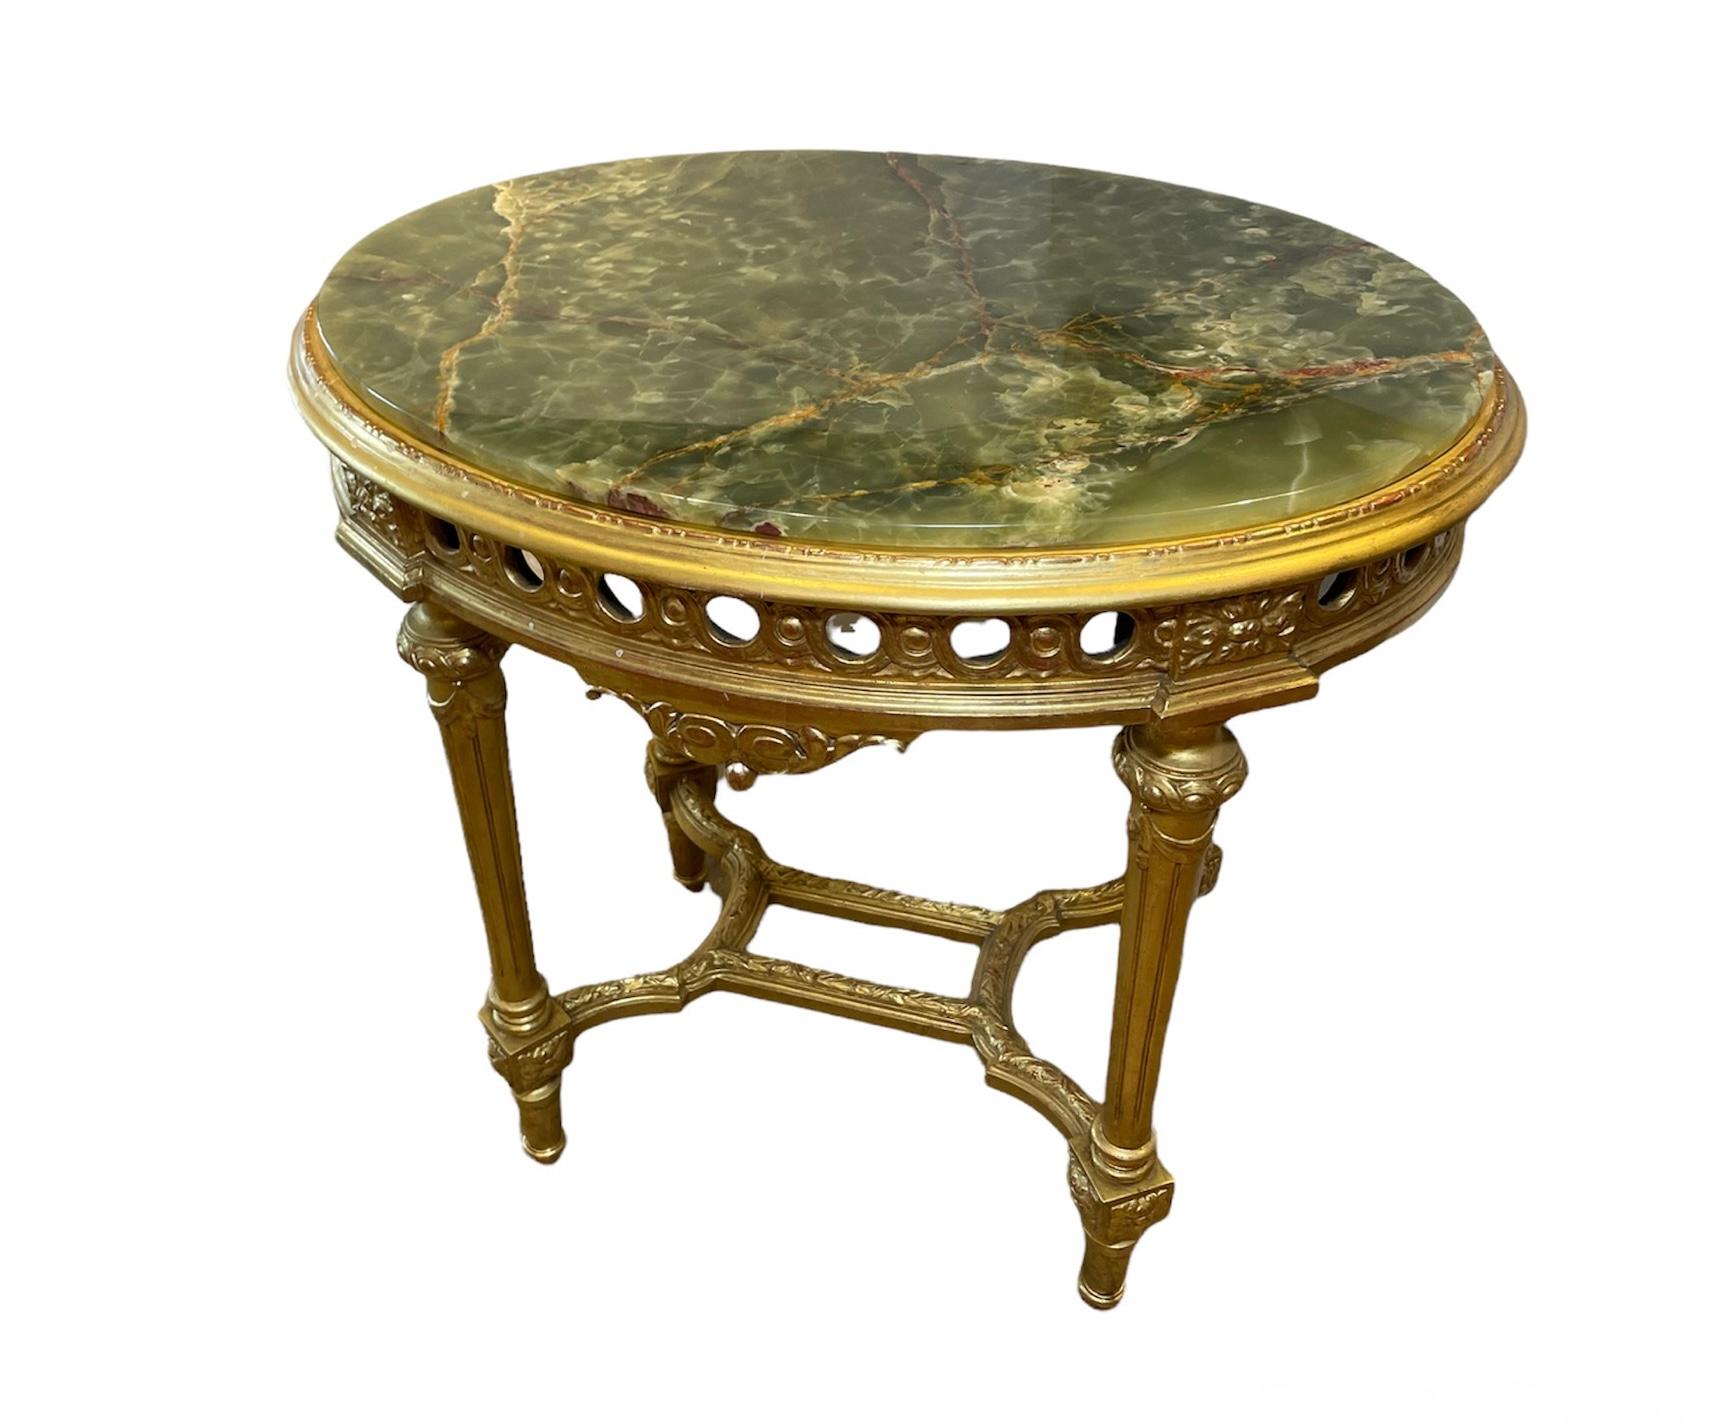 20th Century Louis XVI Style Green Onyx Top Gilded Wood Center Table For Sale